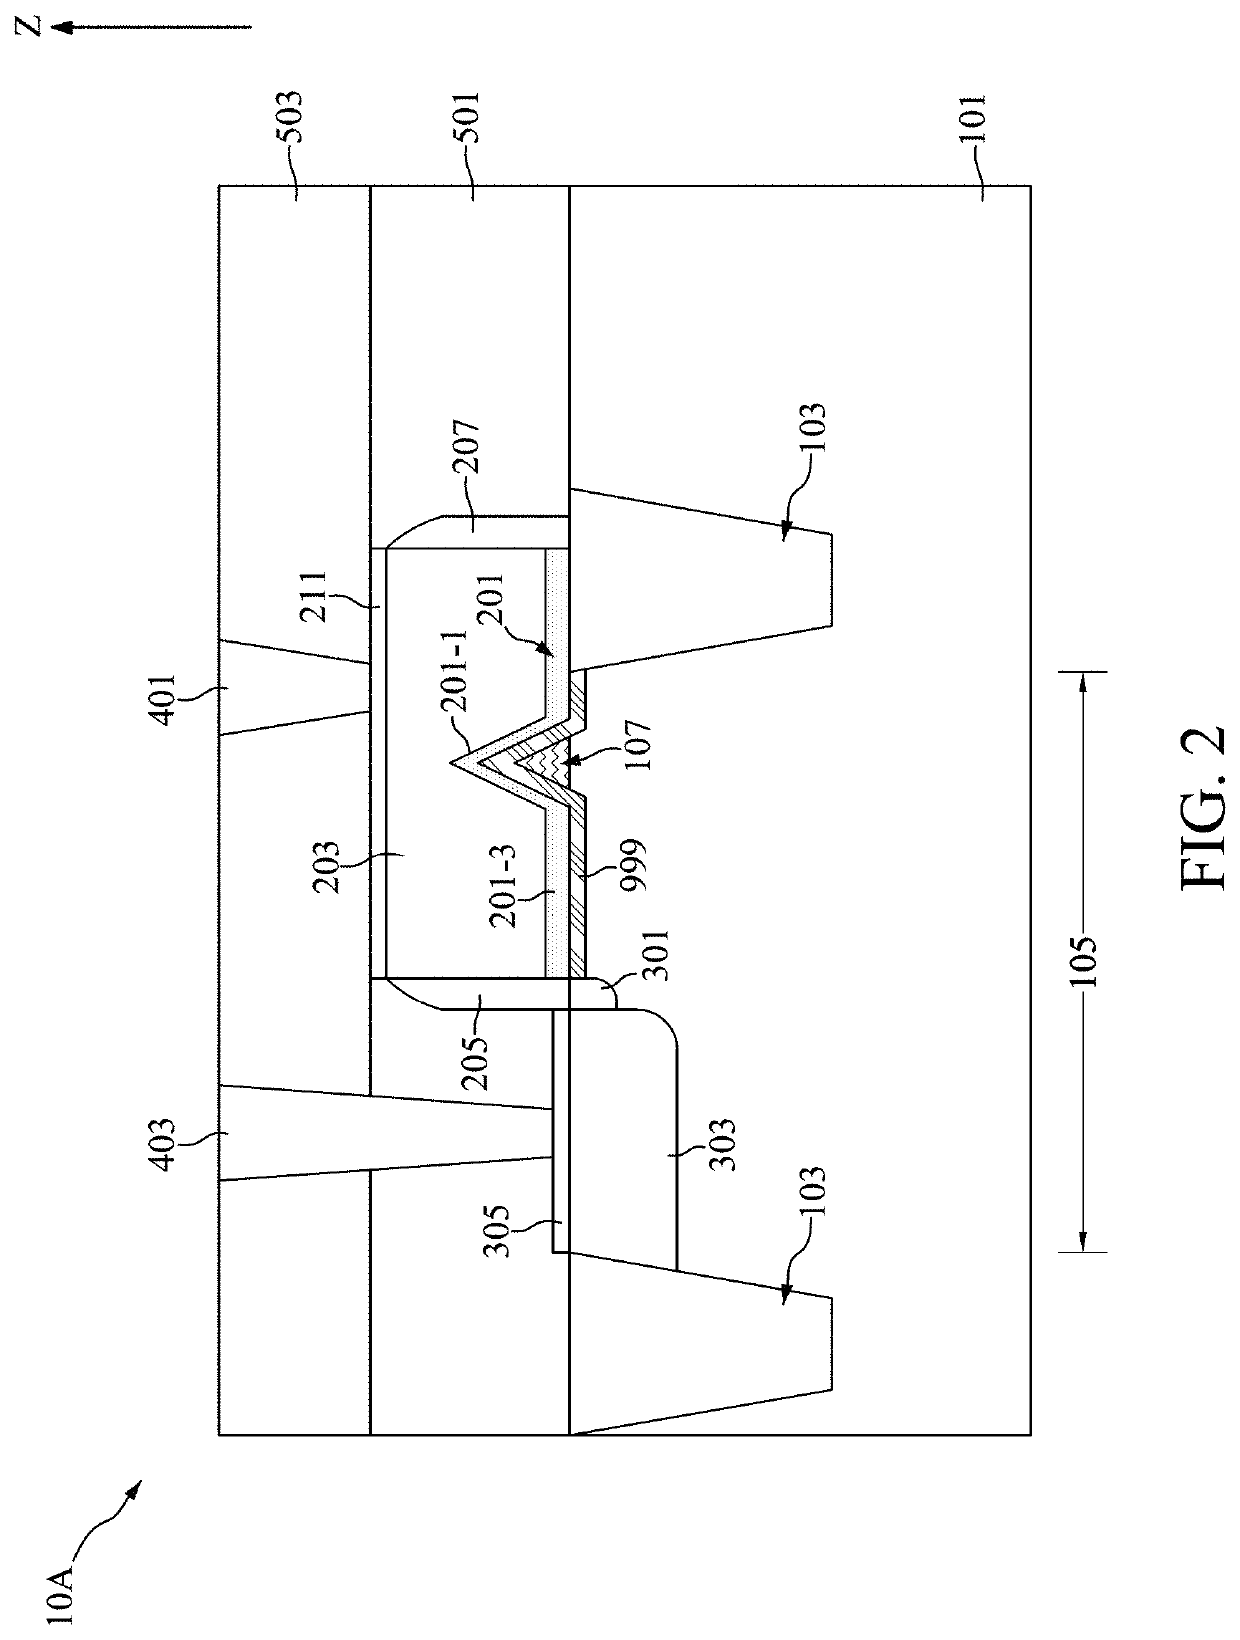 Semiconductor device with programmable Anti-fuse feature and method for fabricating the same